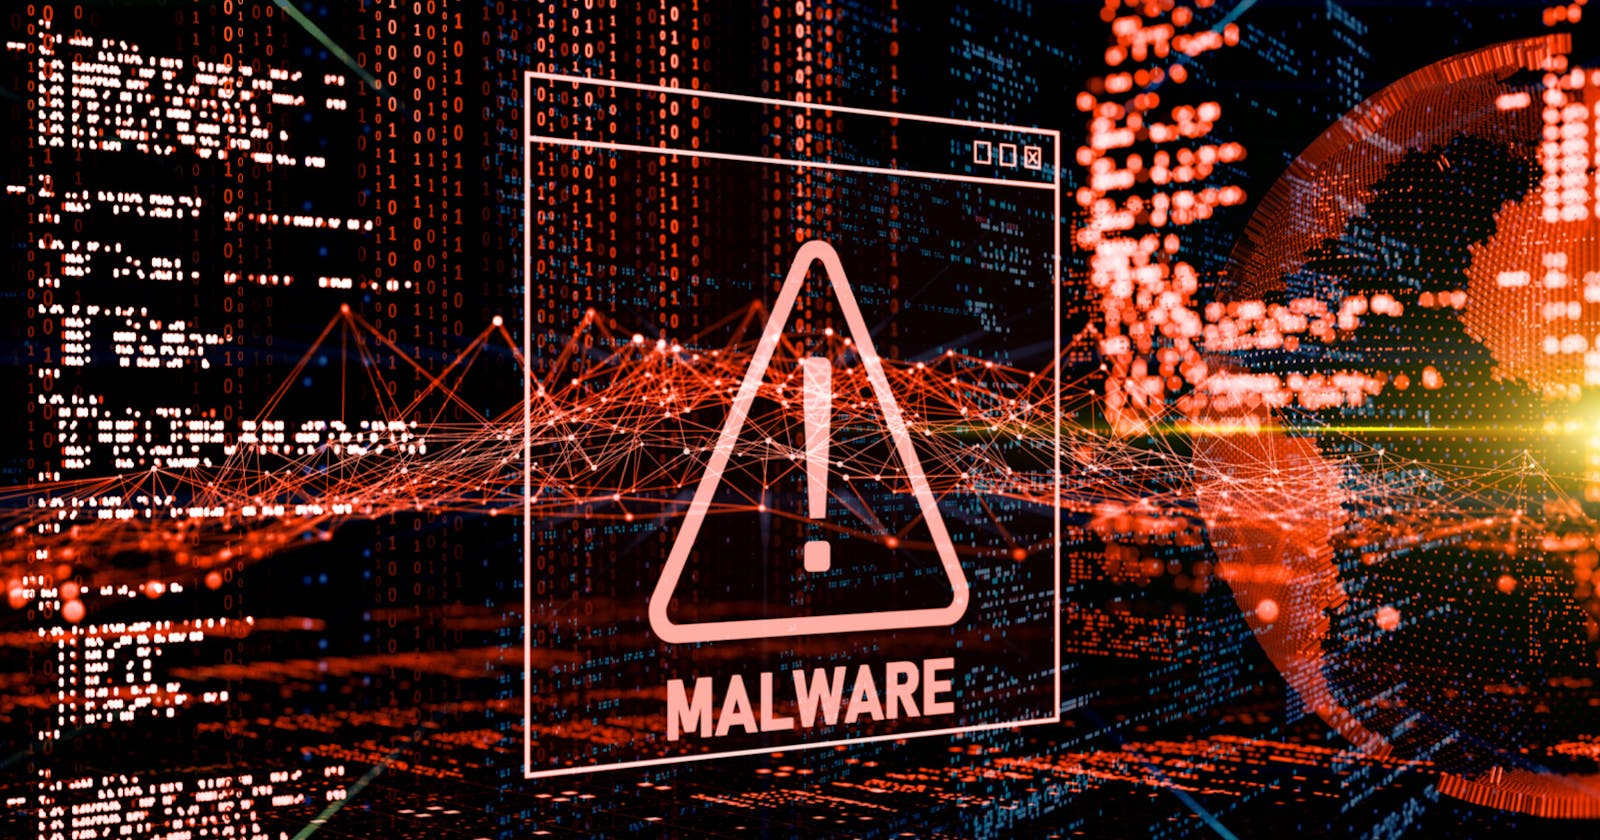 Malware: Types, Effects And Prevention.